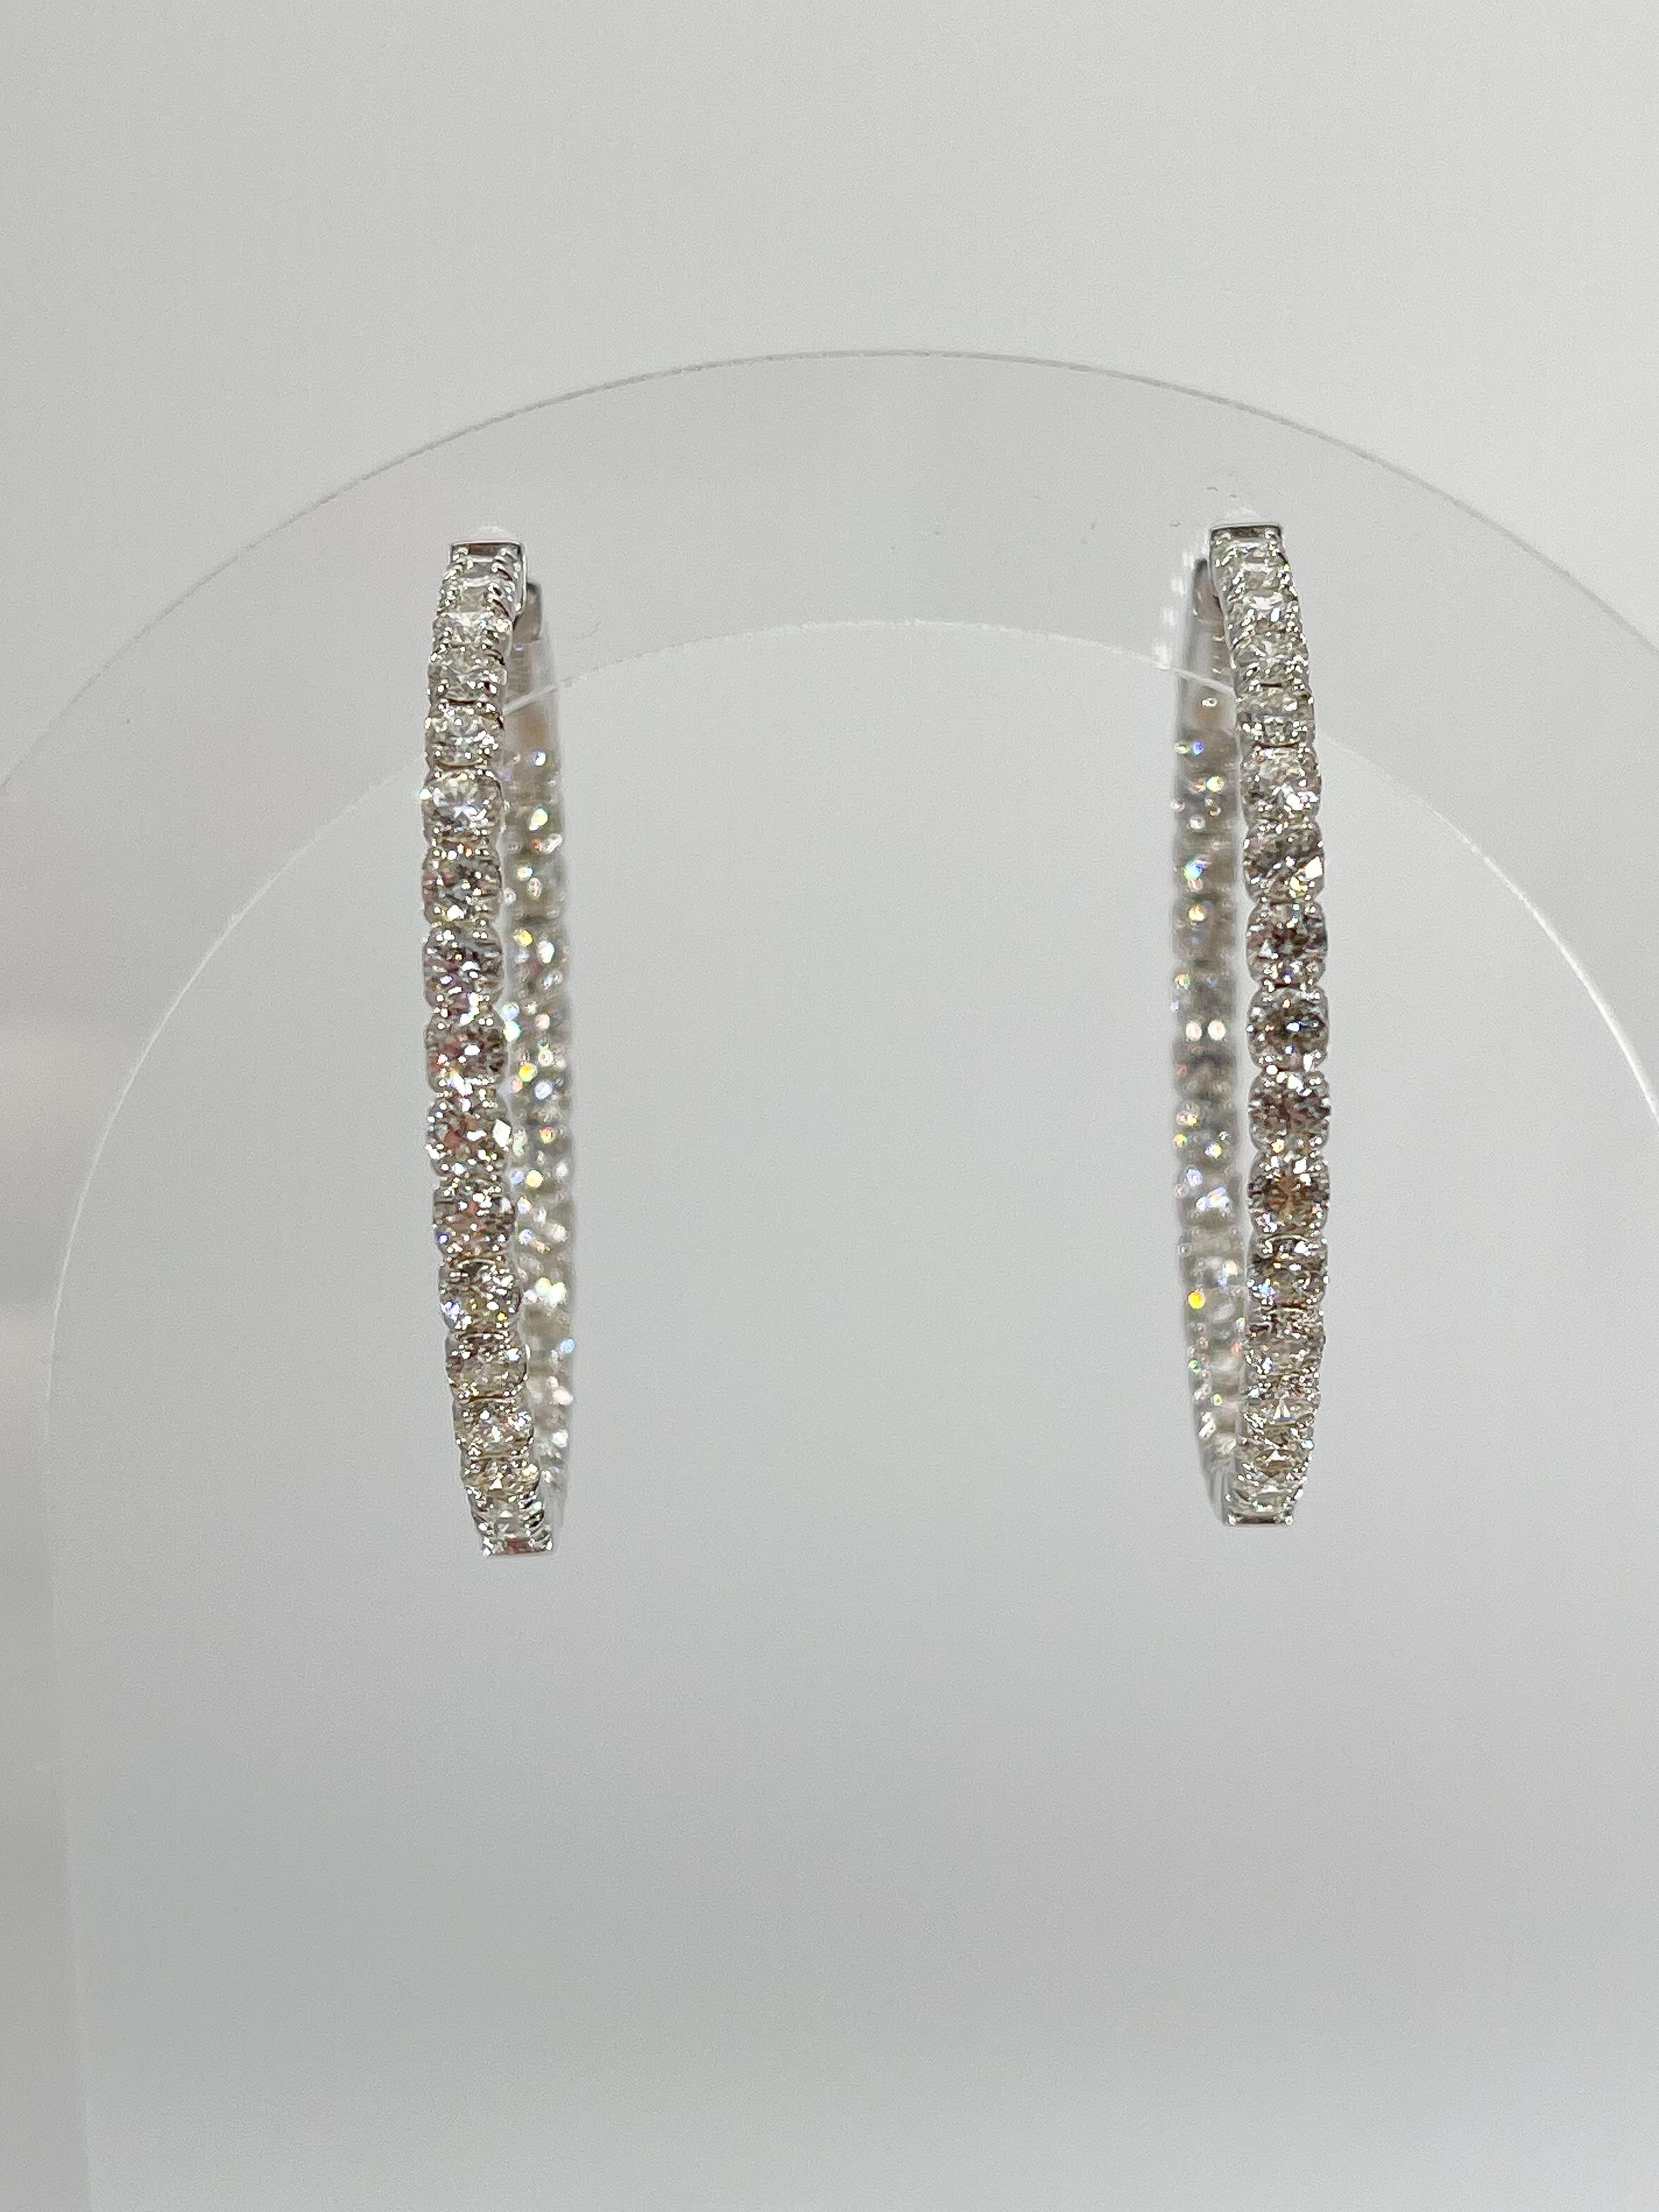 These beautiful 14k white gold 4.00 ctw round cut diamond inside out hoop earrings are the perfect piece to add to your collection. They have a diameter of 35.6mm and a weight of 7.7 grams. A push button to open the earrings is included for easy